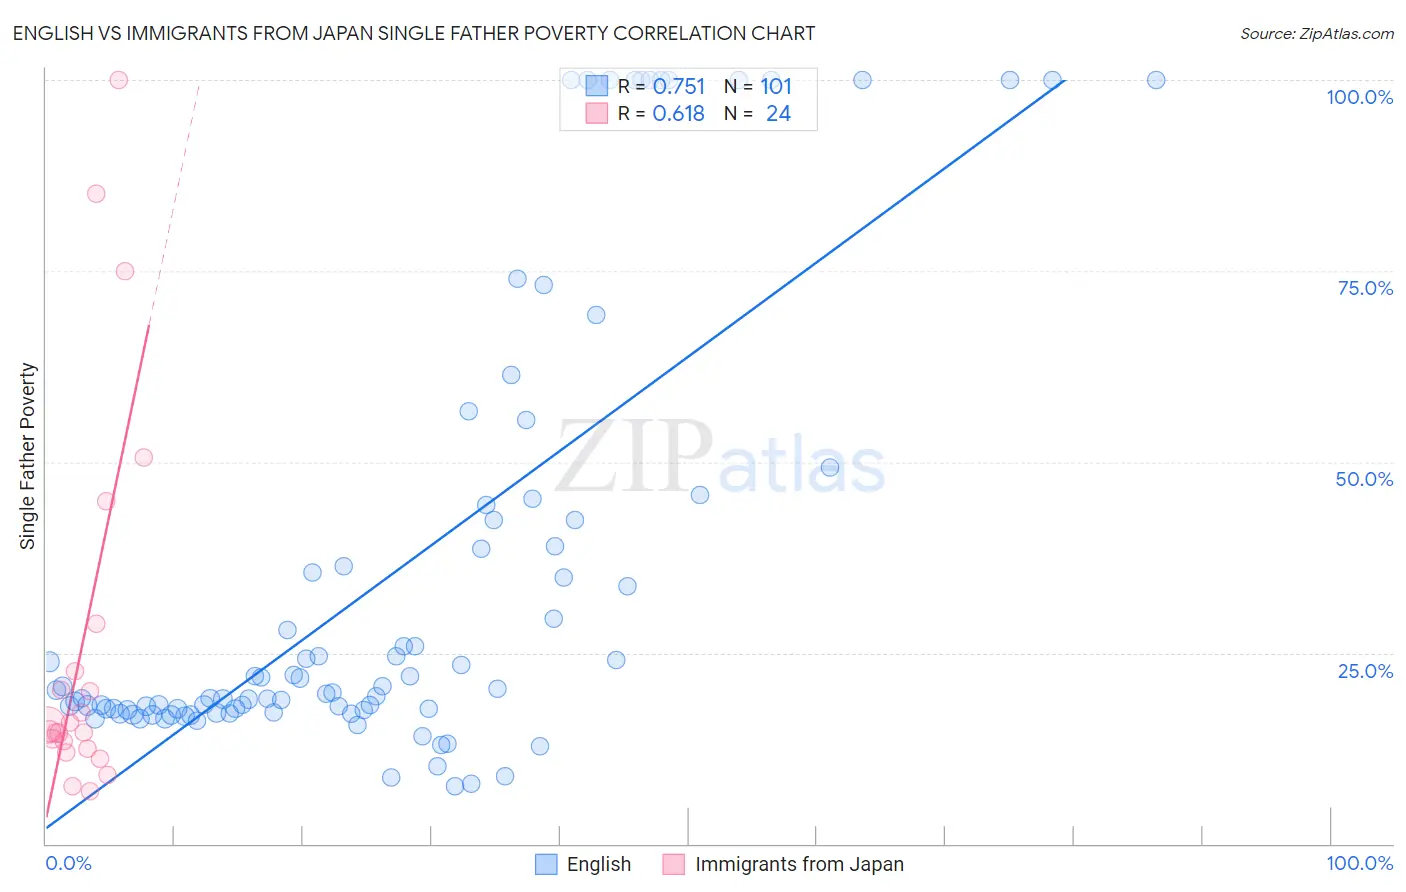 English vs Immigrants from Japan Single Father Poverty